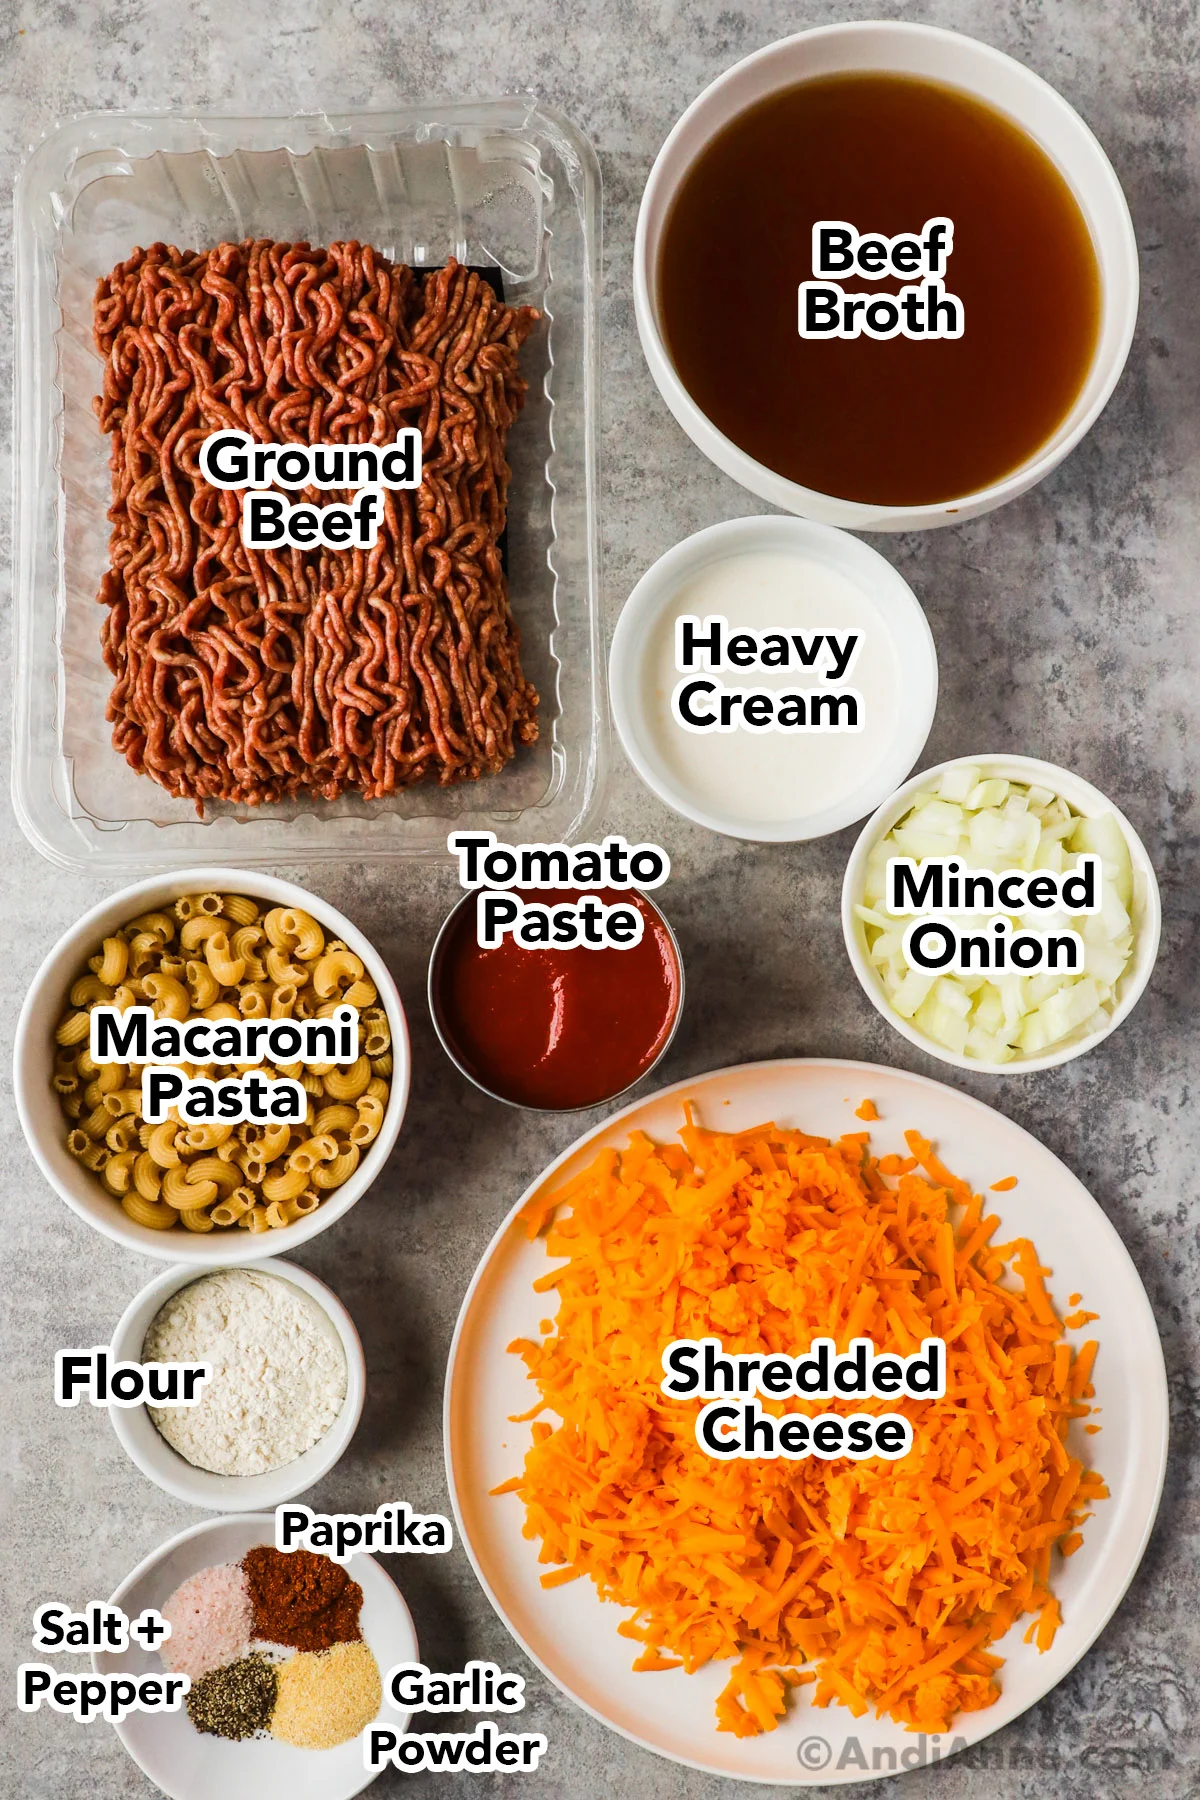 Recipe ingredients in containers including raw ground beef, broth, heavy cream, minced onion, tomato paste, macaroni pasta, shredded cheese, spices and flour